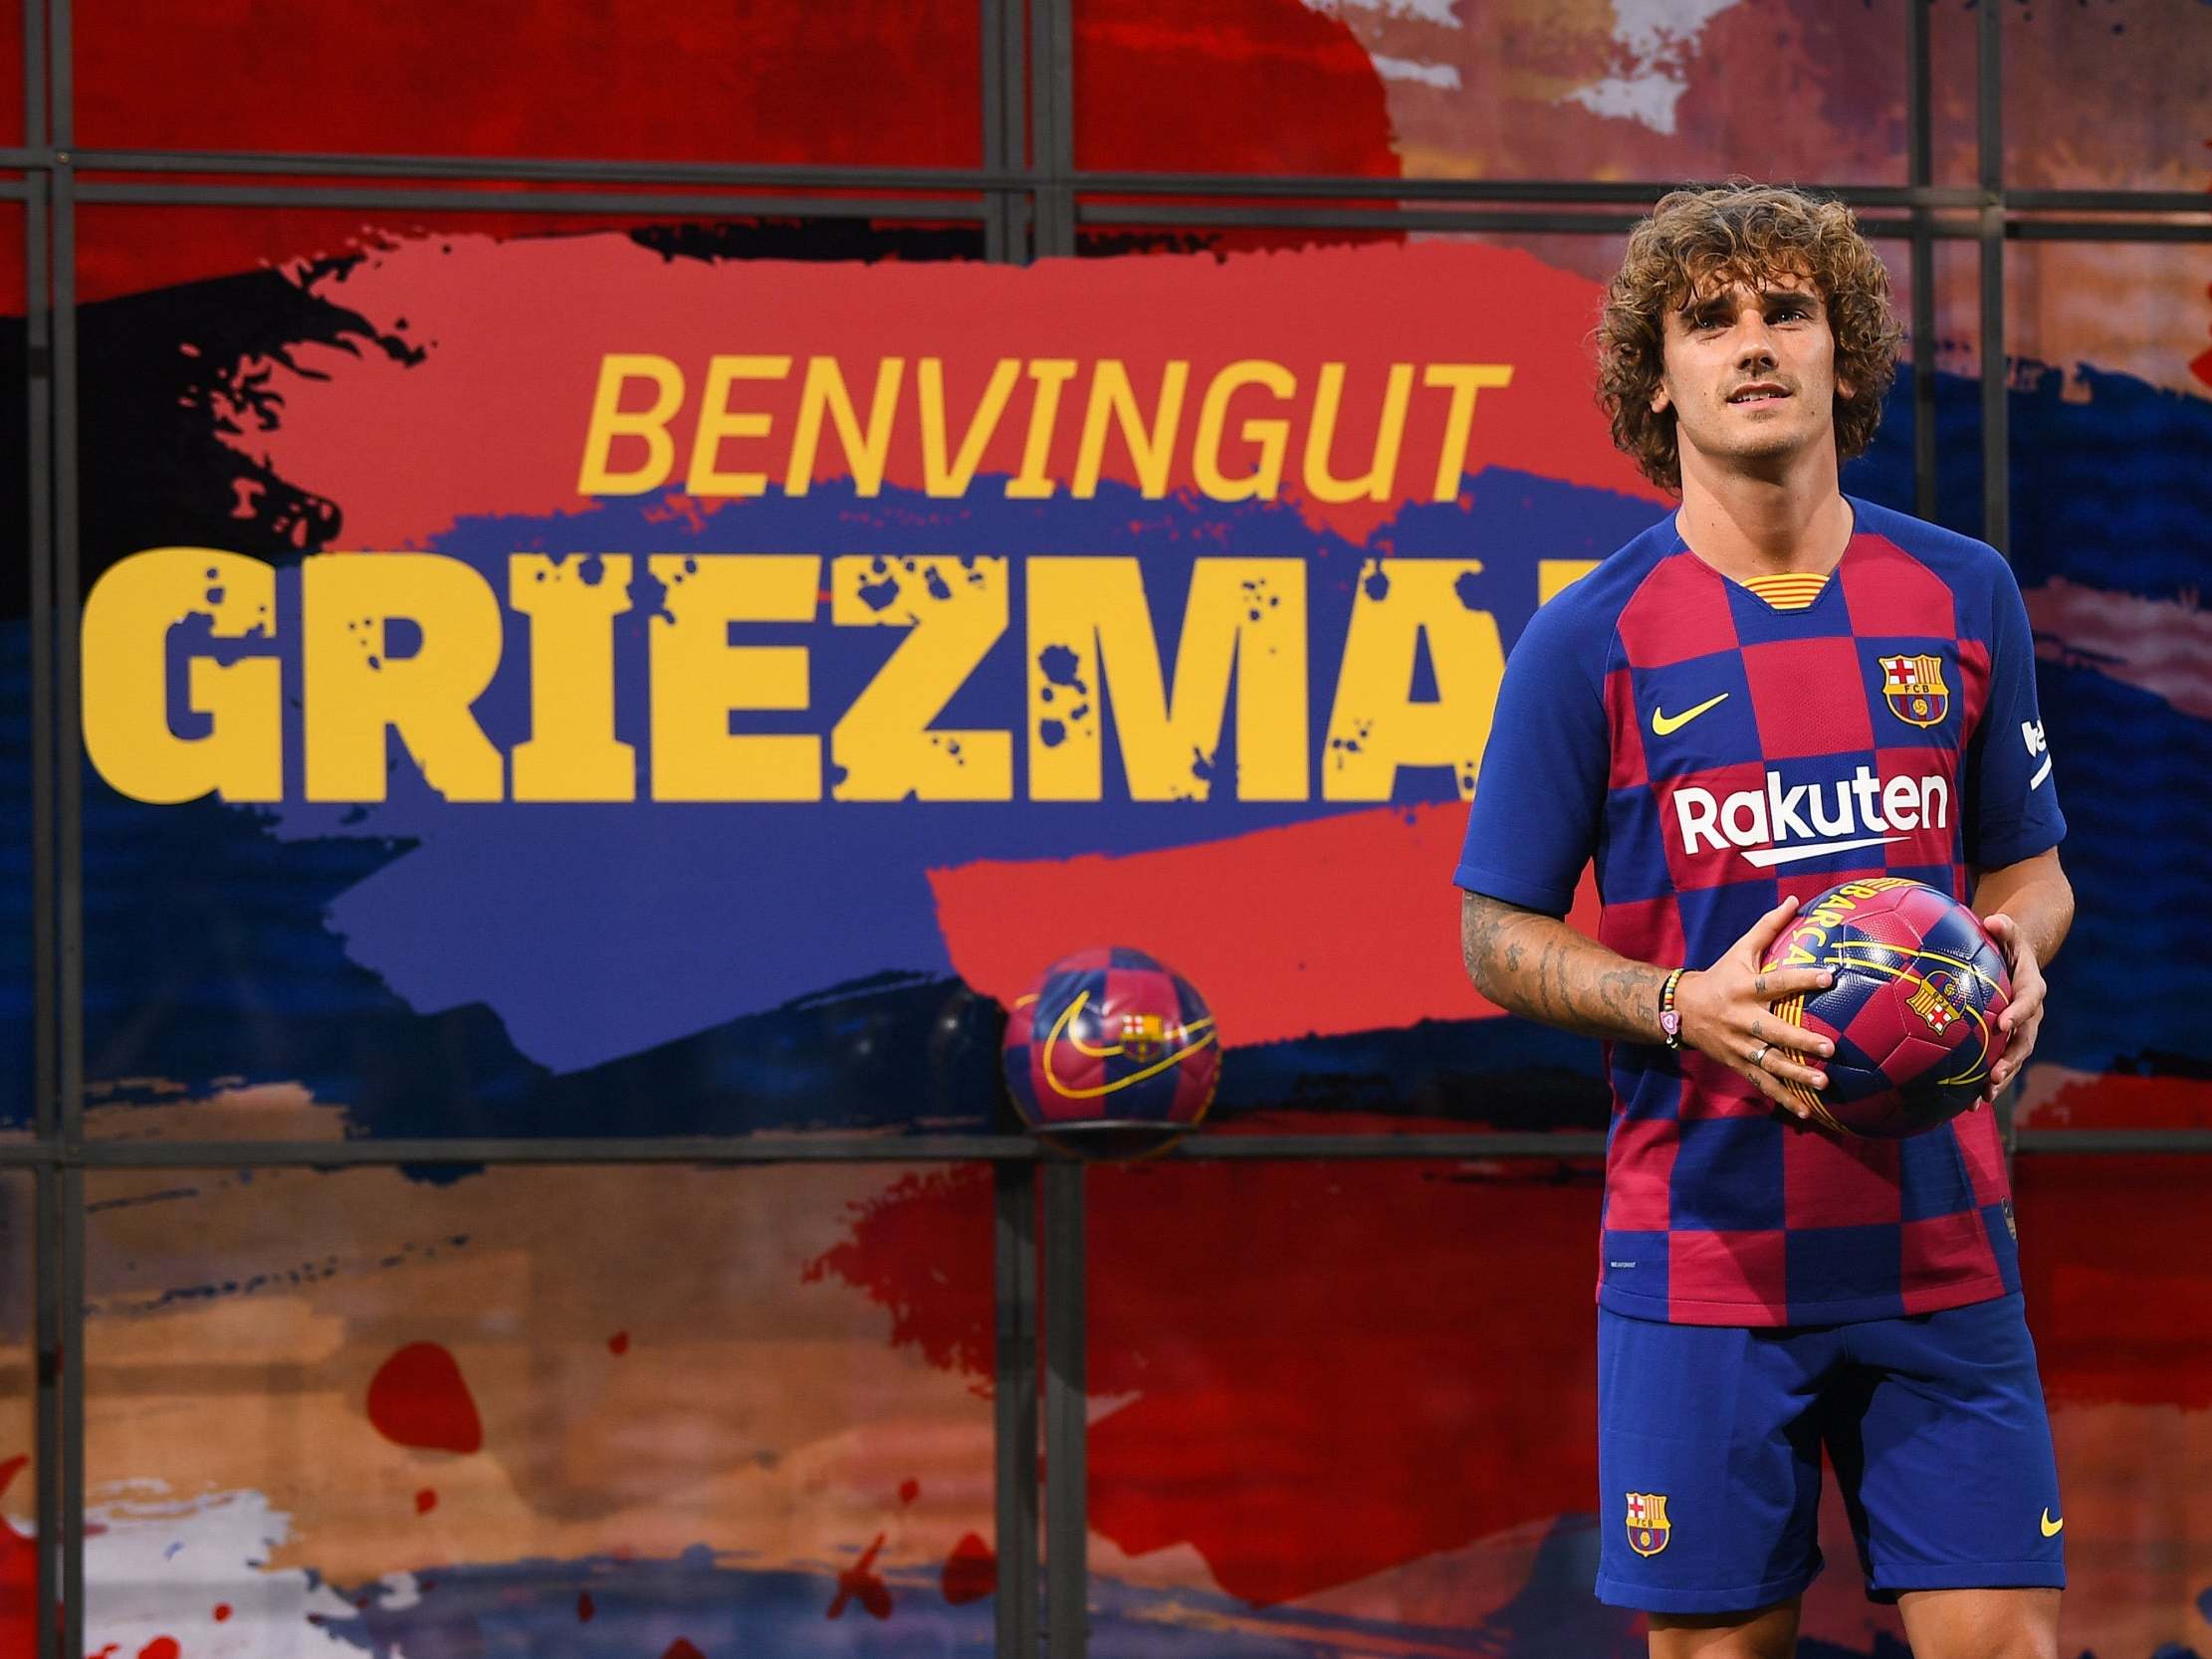 Griezmann adds to an already inflated wage bill